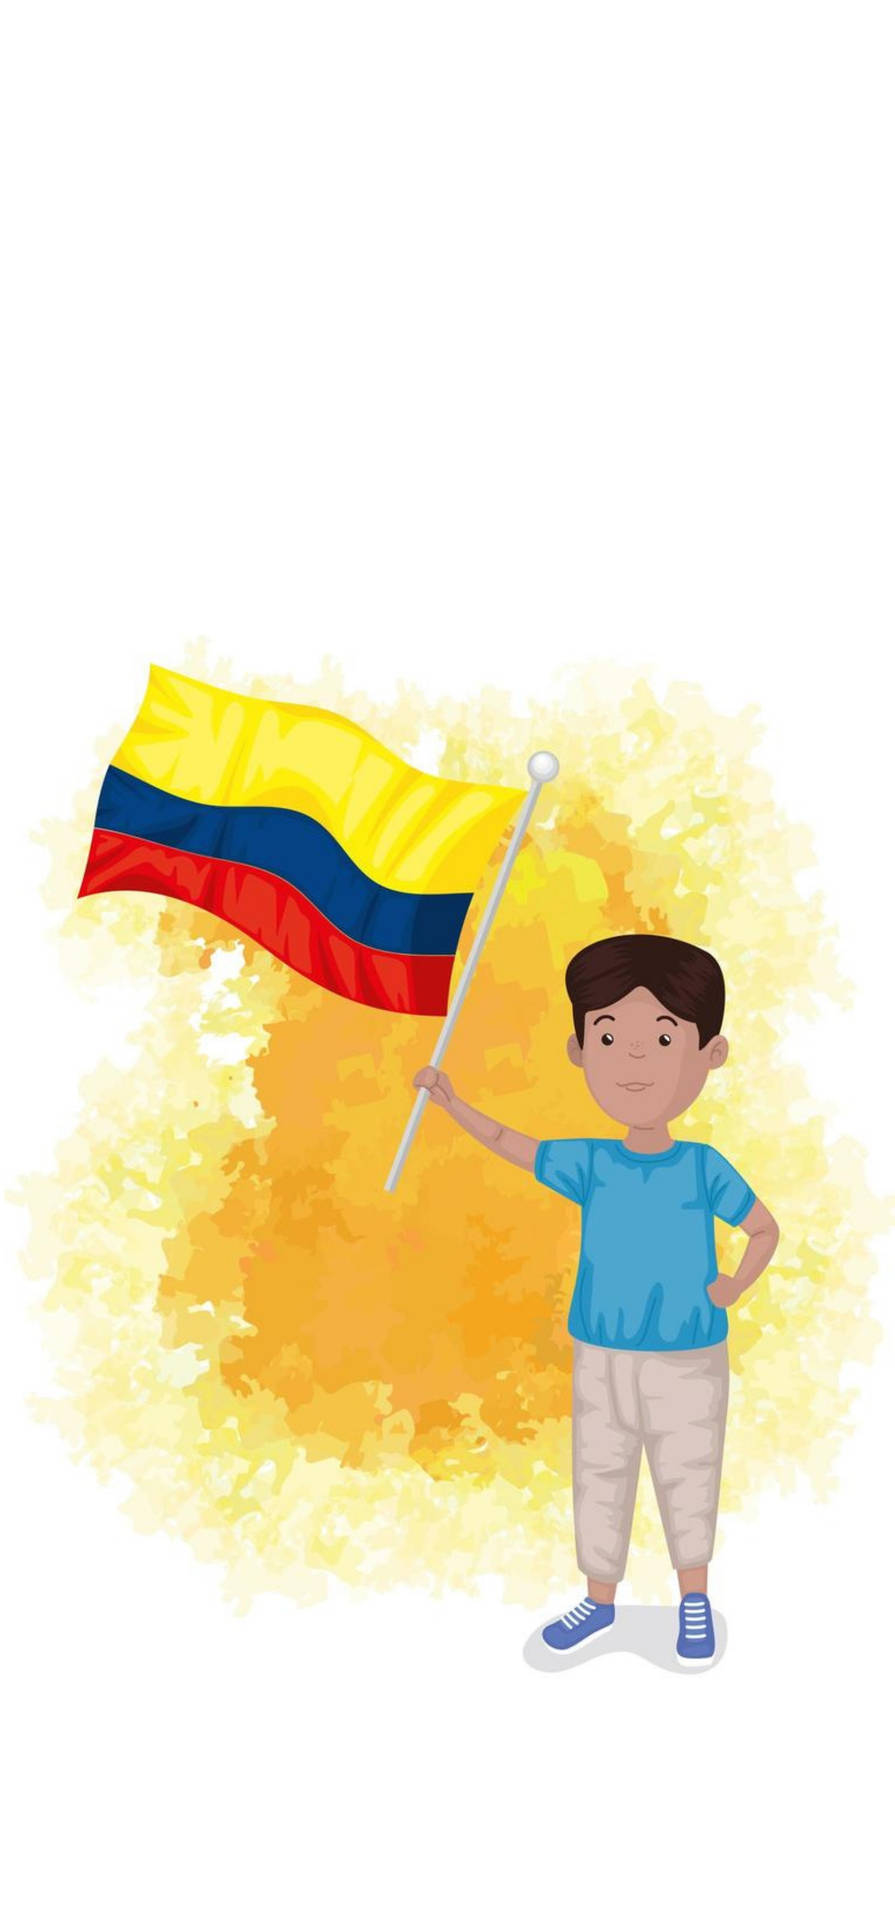 Colombia Flag Graphic